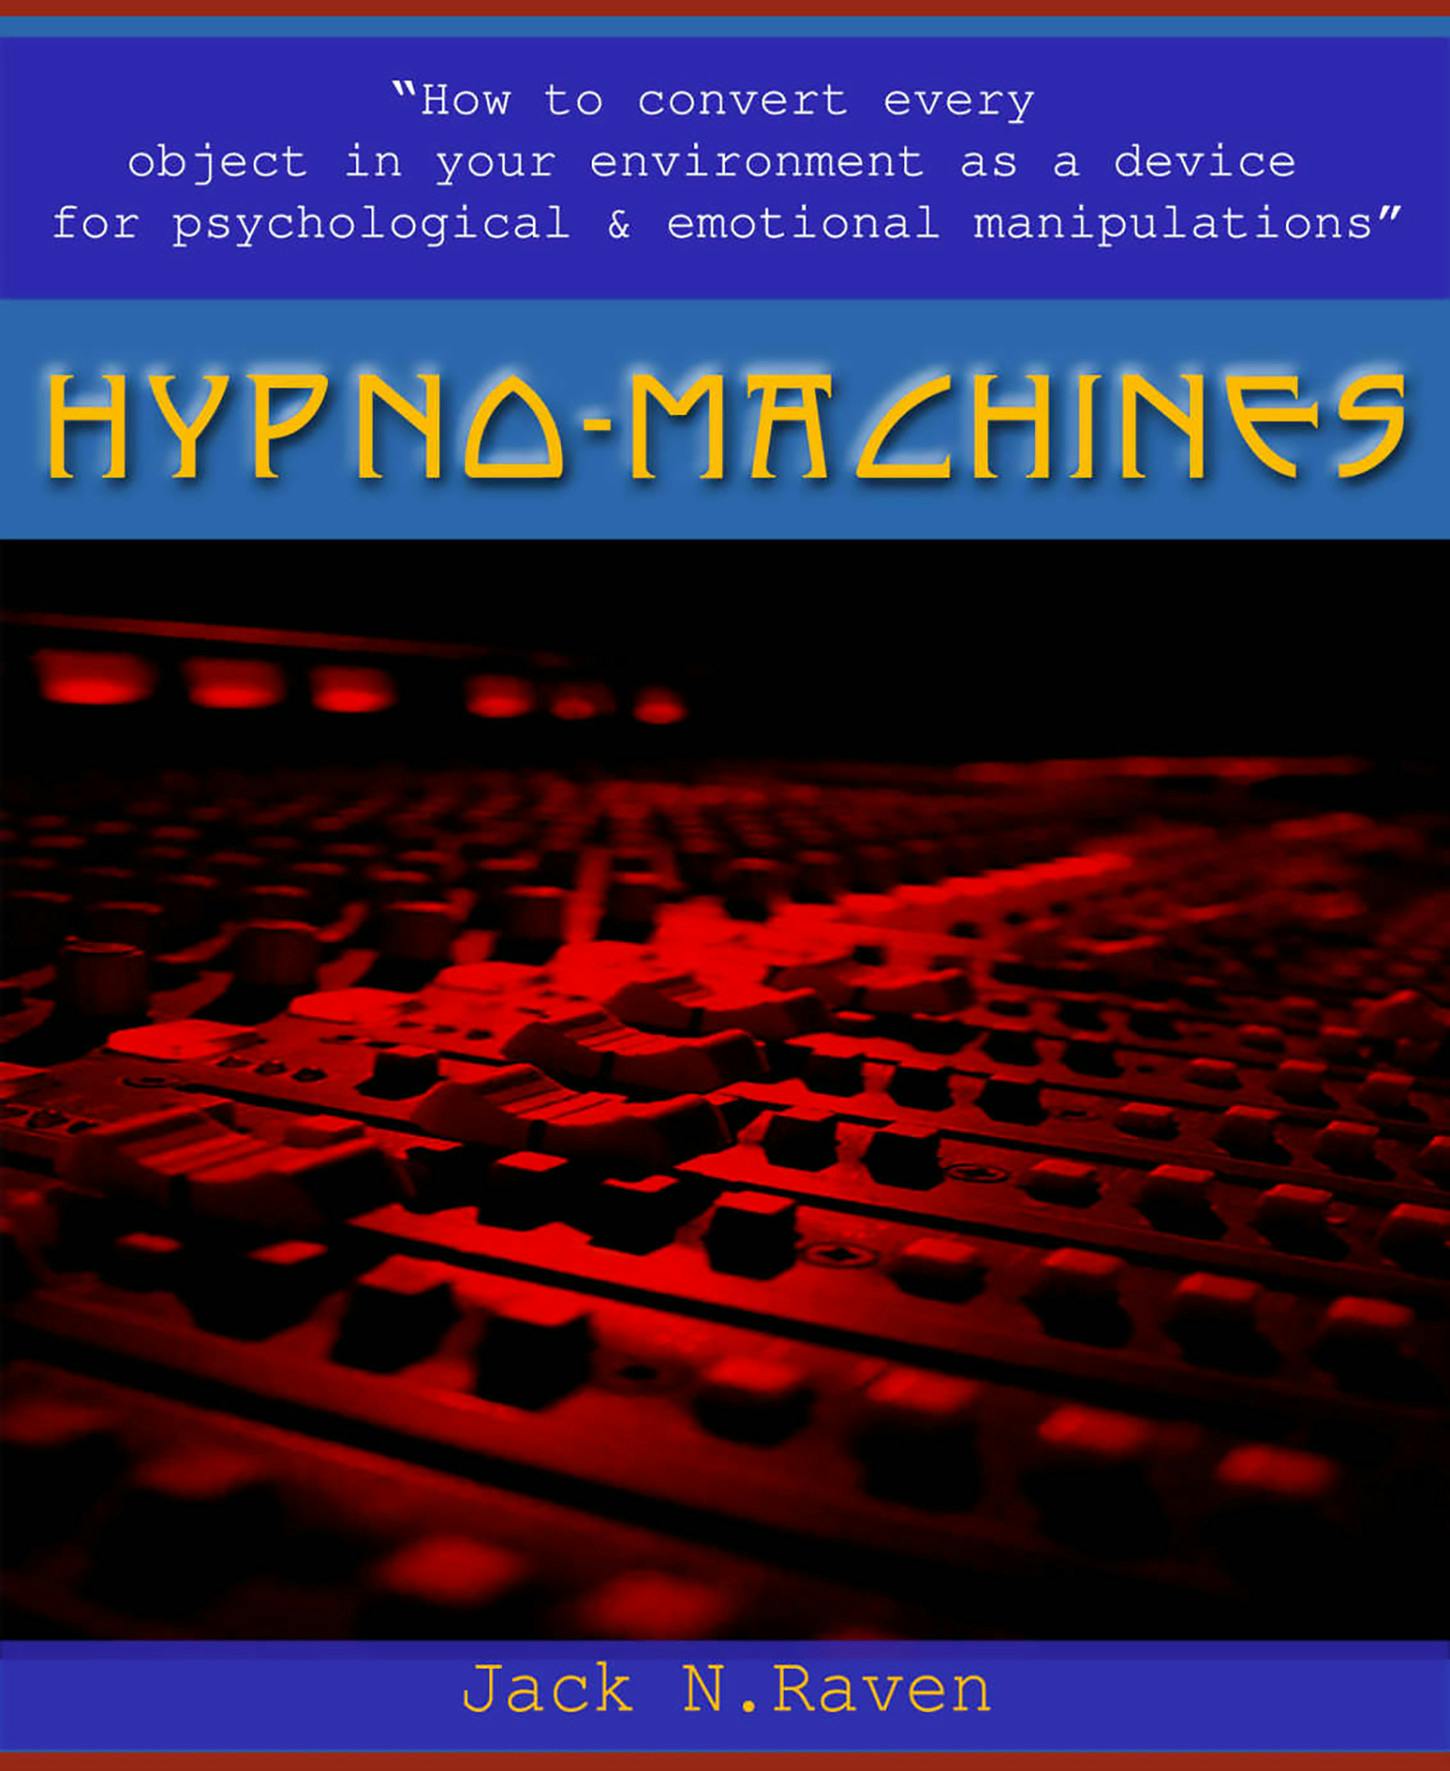 Hypno Machines - How To Convert Every Object In Your Environment As a Device For Psychological and Emotional Manipulator - Jack N. Raven